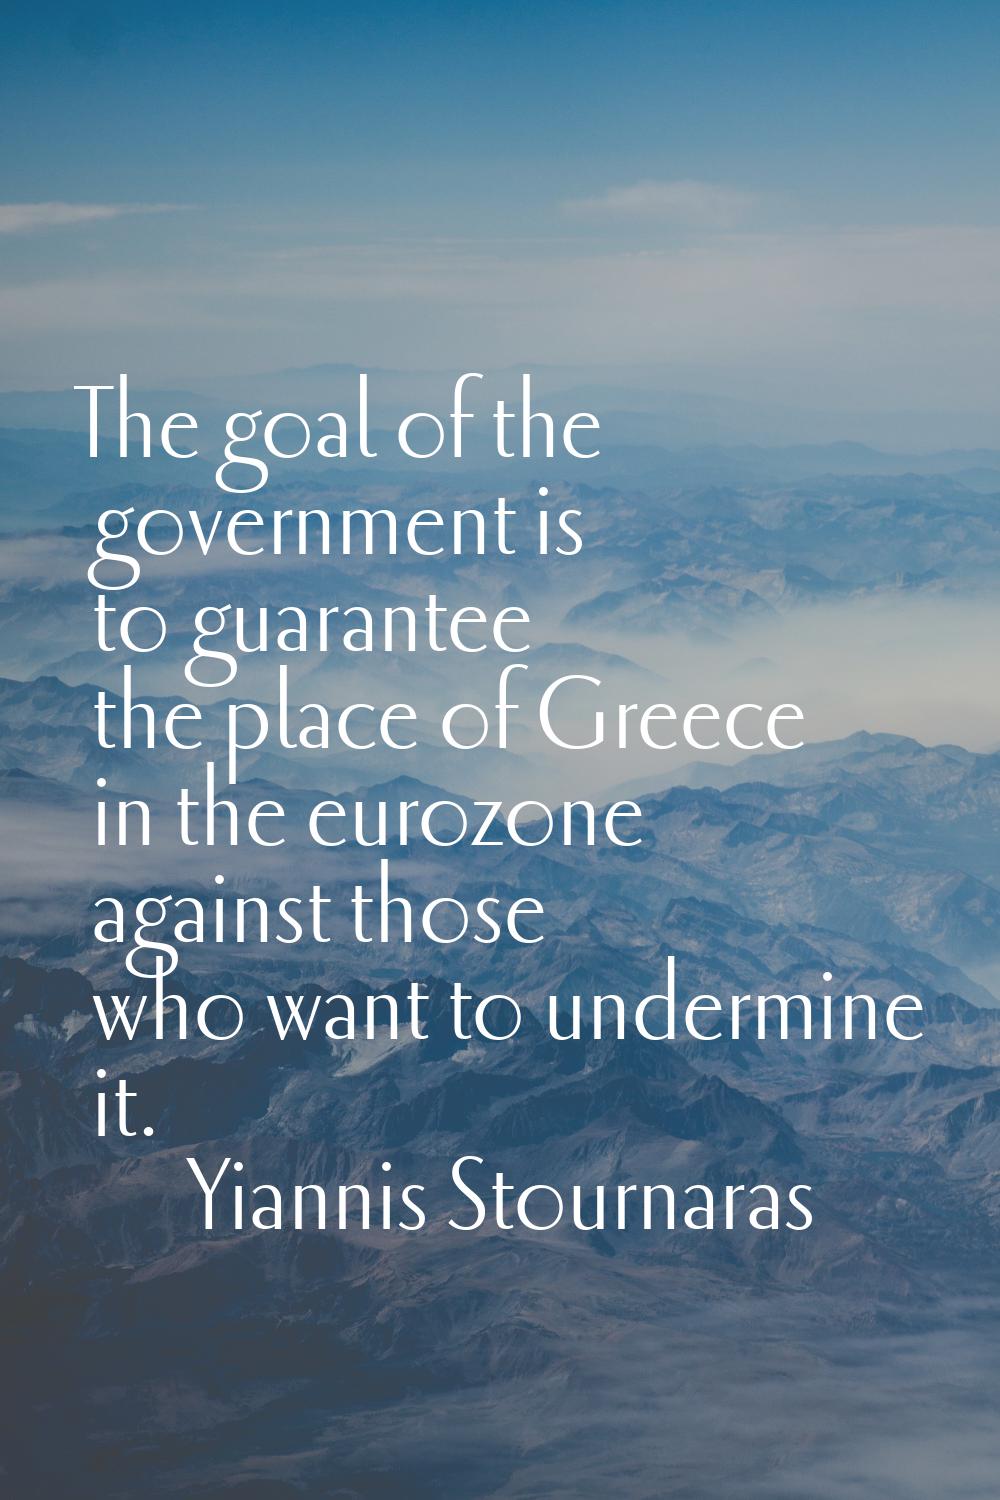 The goal of the government is to guarantee the place of Greece in the eurozone against those who wa